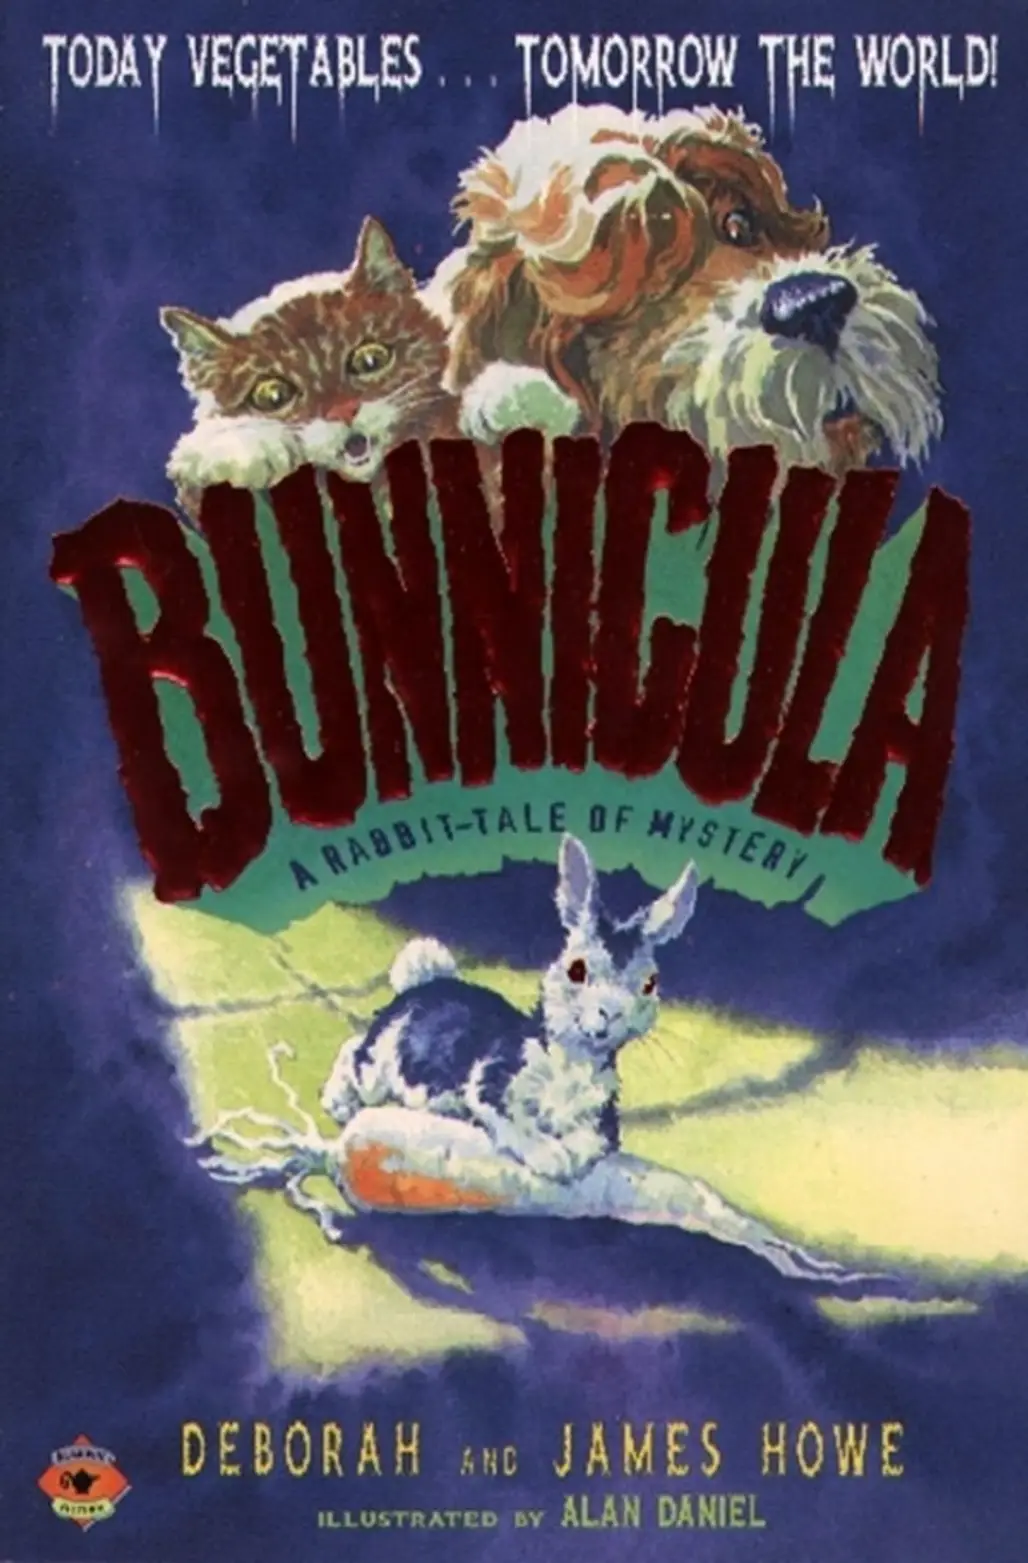 Bunnicula: a Rabbit-Tale of Mystery by Deborah and James Howe